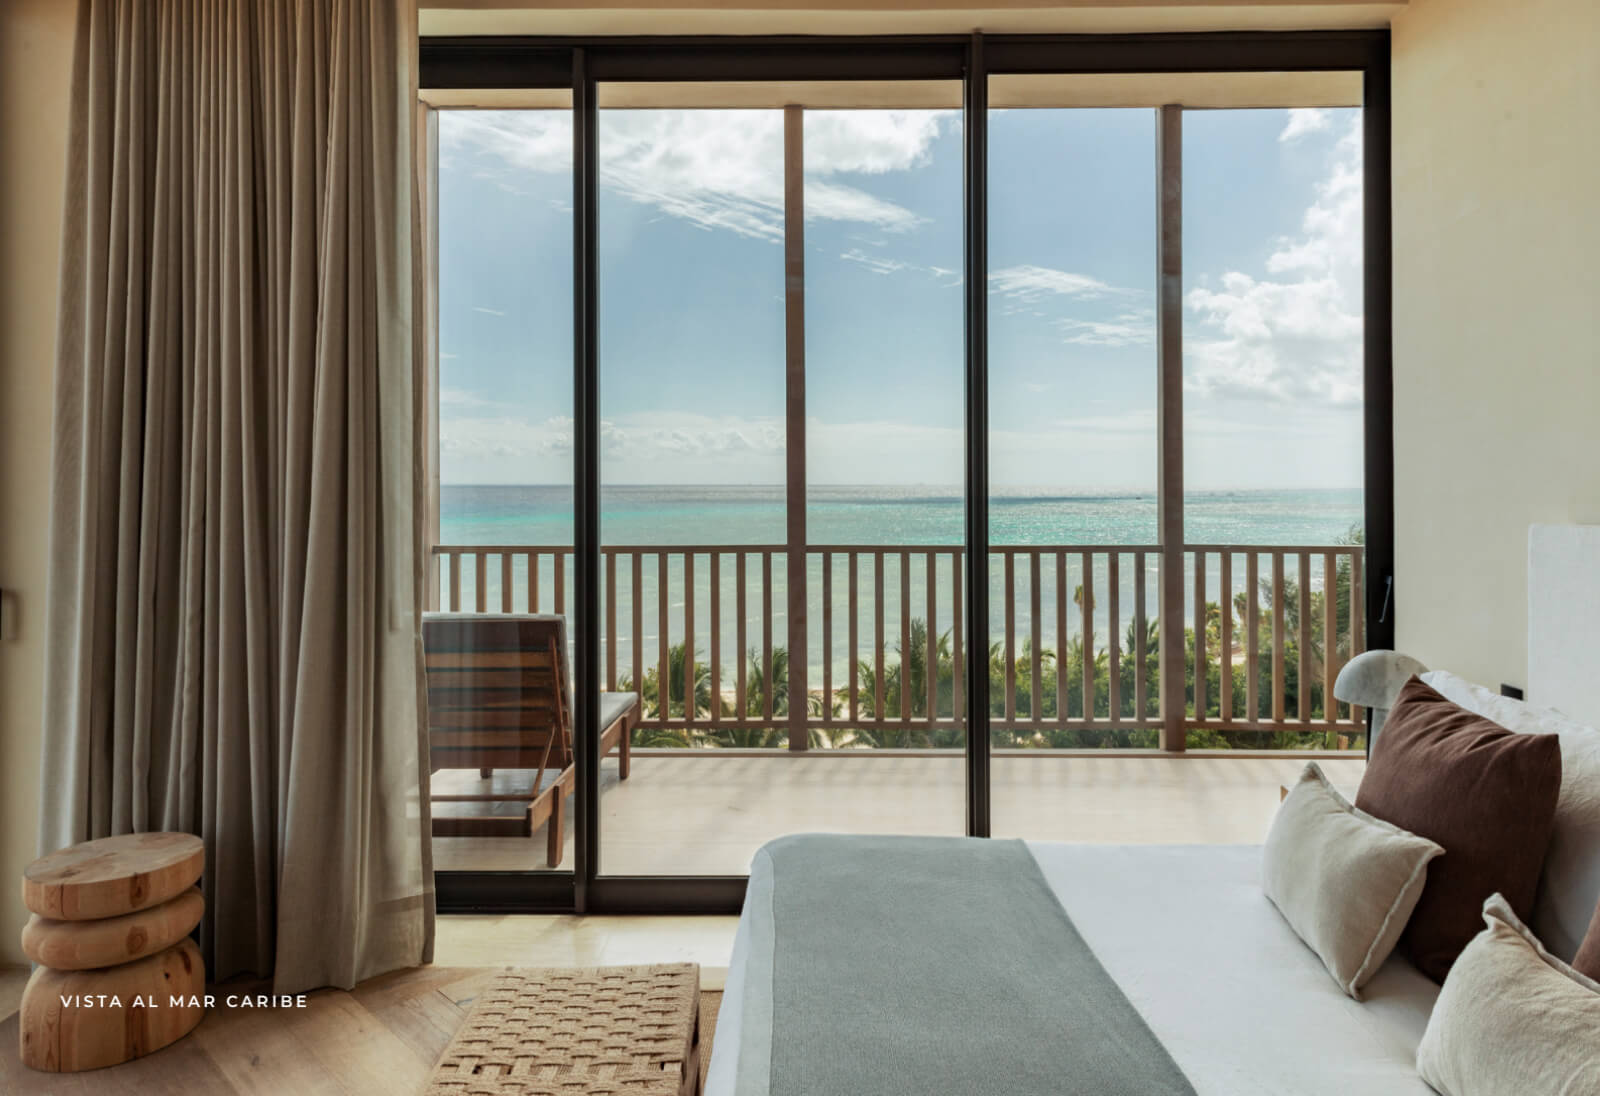 Oceanfront penthouse, with beach club, clubhouse and exclusive amenities in Corasol luxury residential, pre-construction in Playa del Carmen